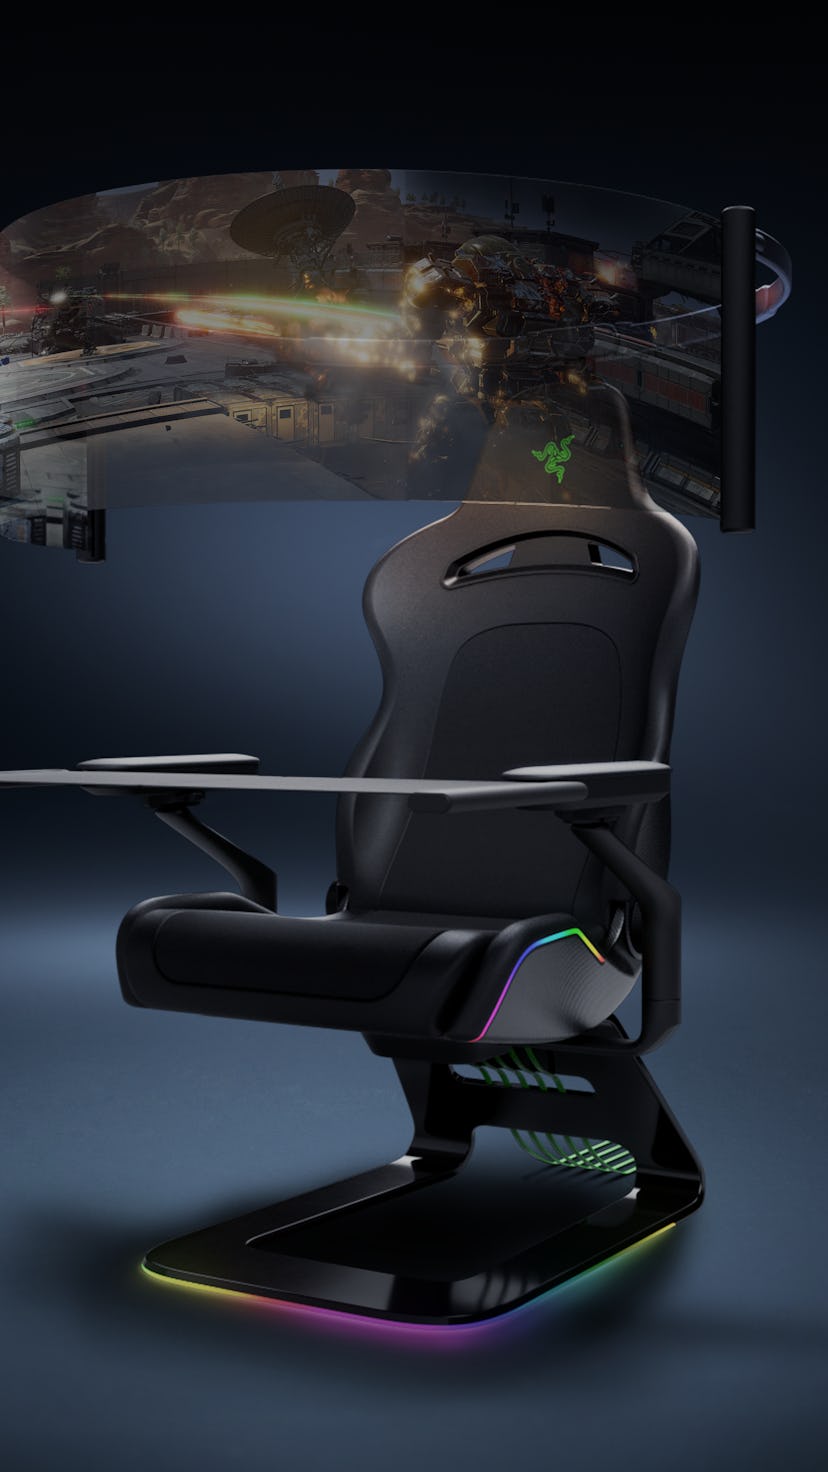 Razer's Project Brooklyn is an immersive gaming chair unveiled at CES 2021.